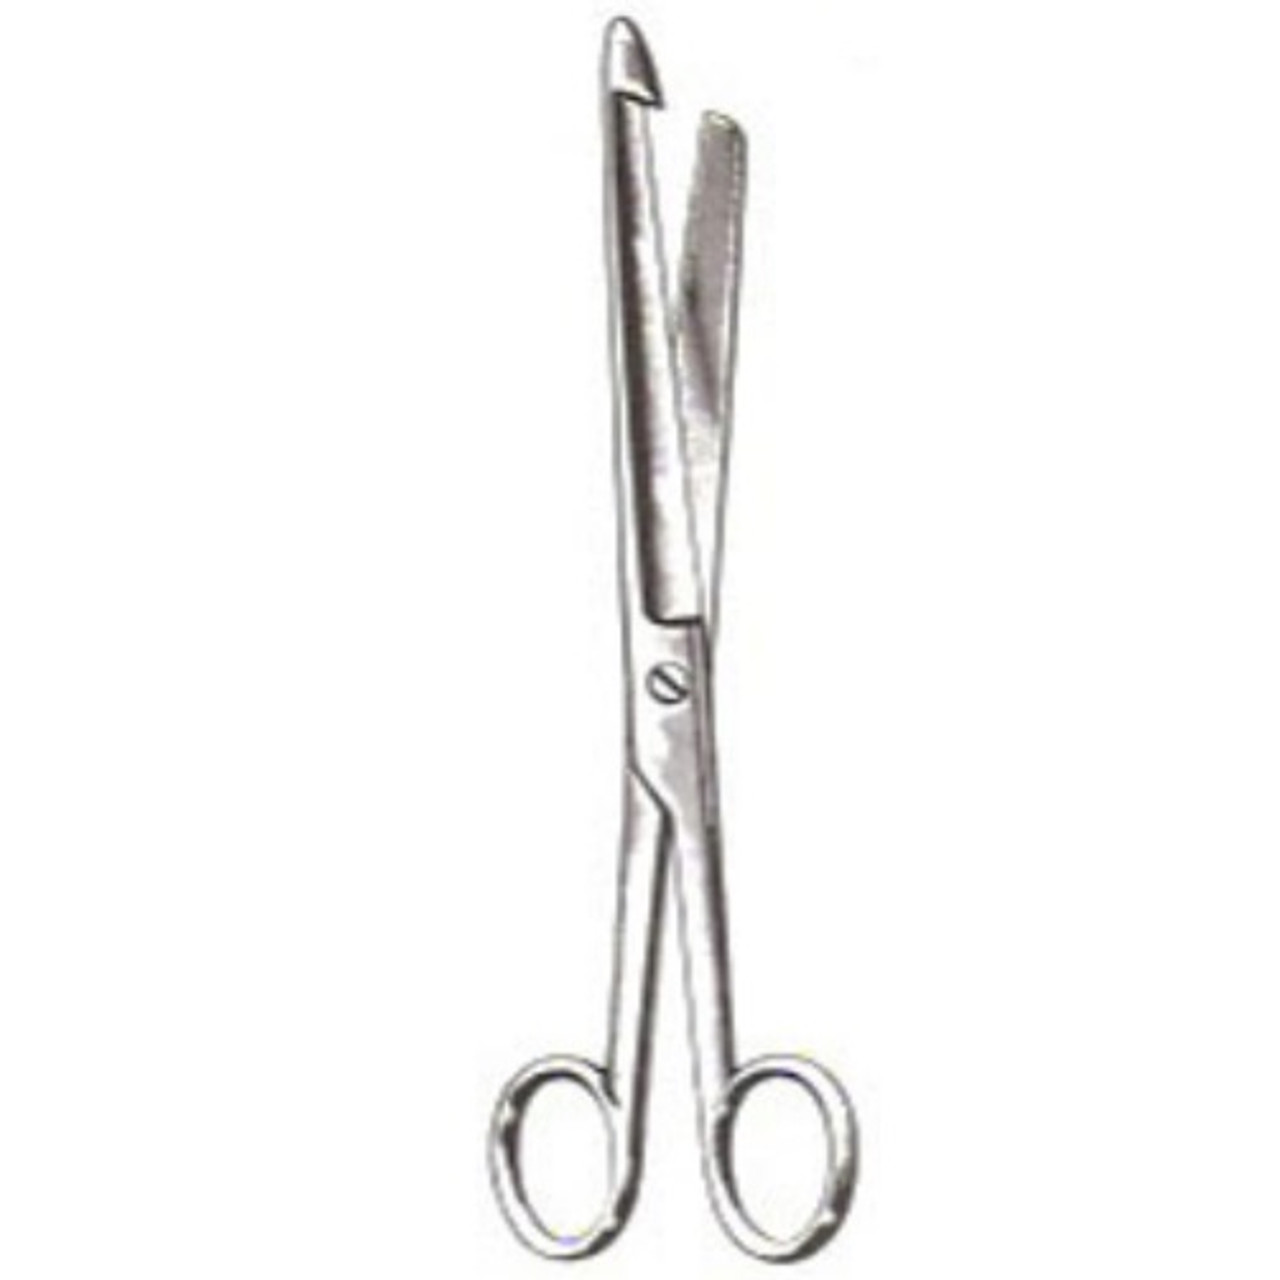 WAGENER Ear Hook, with ball tip, size 3, 5½